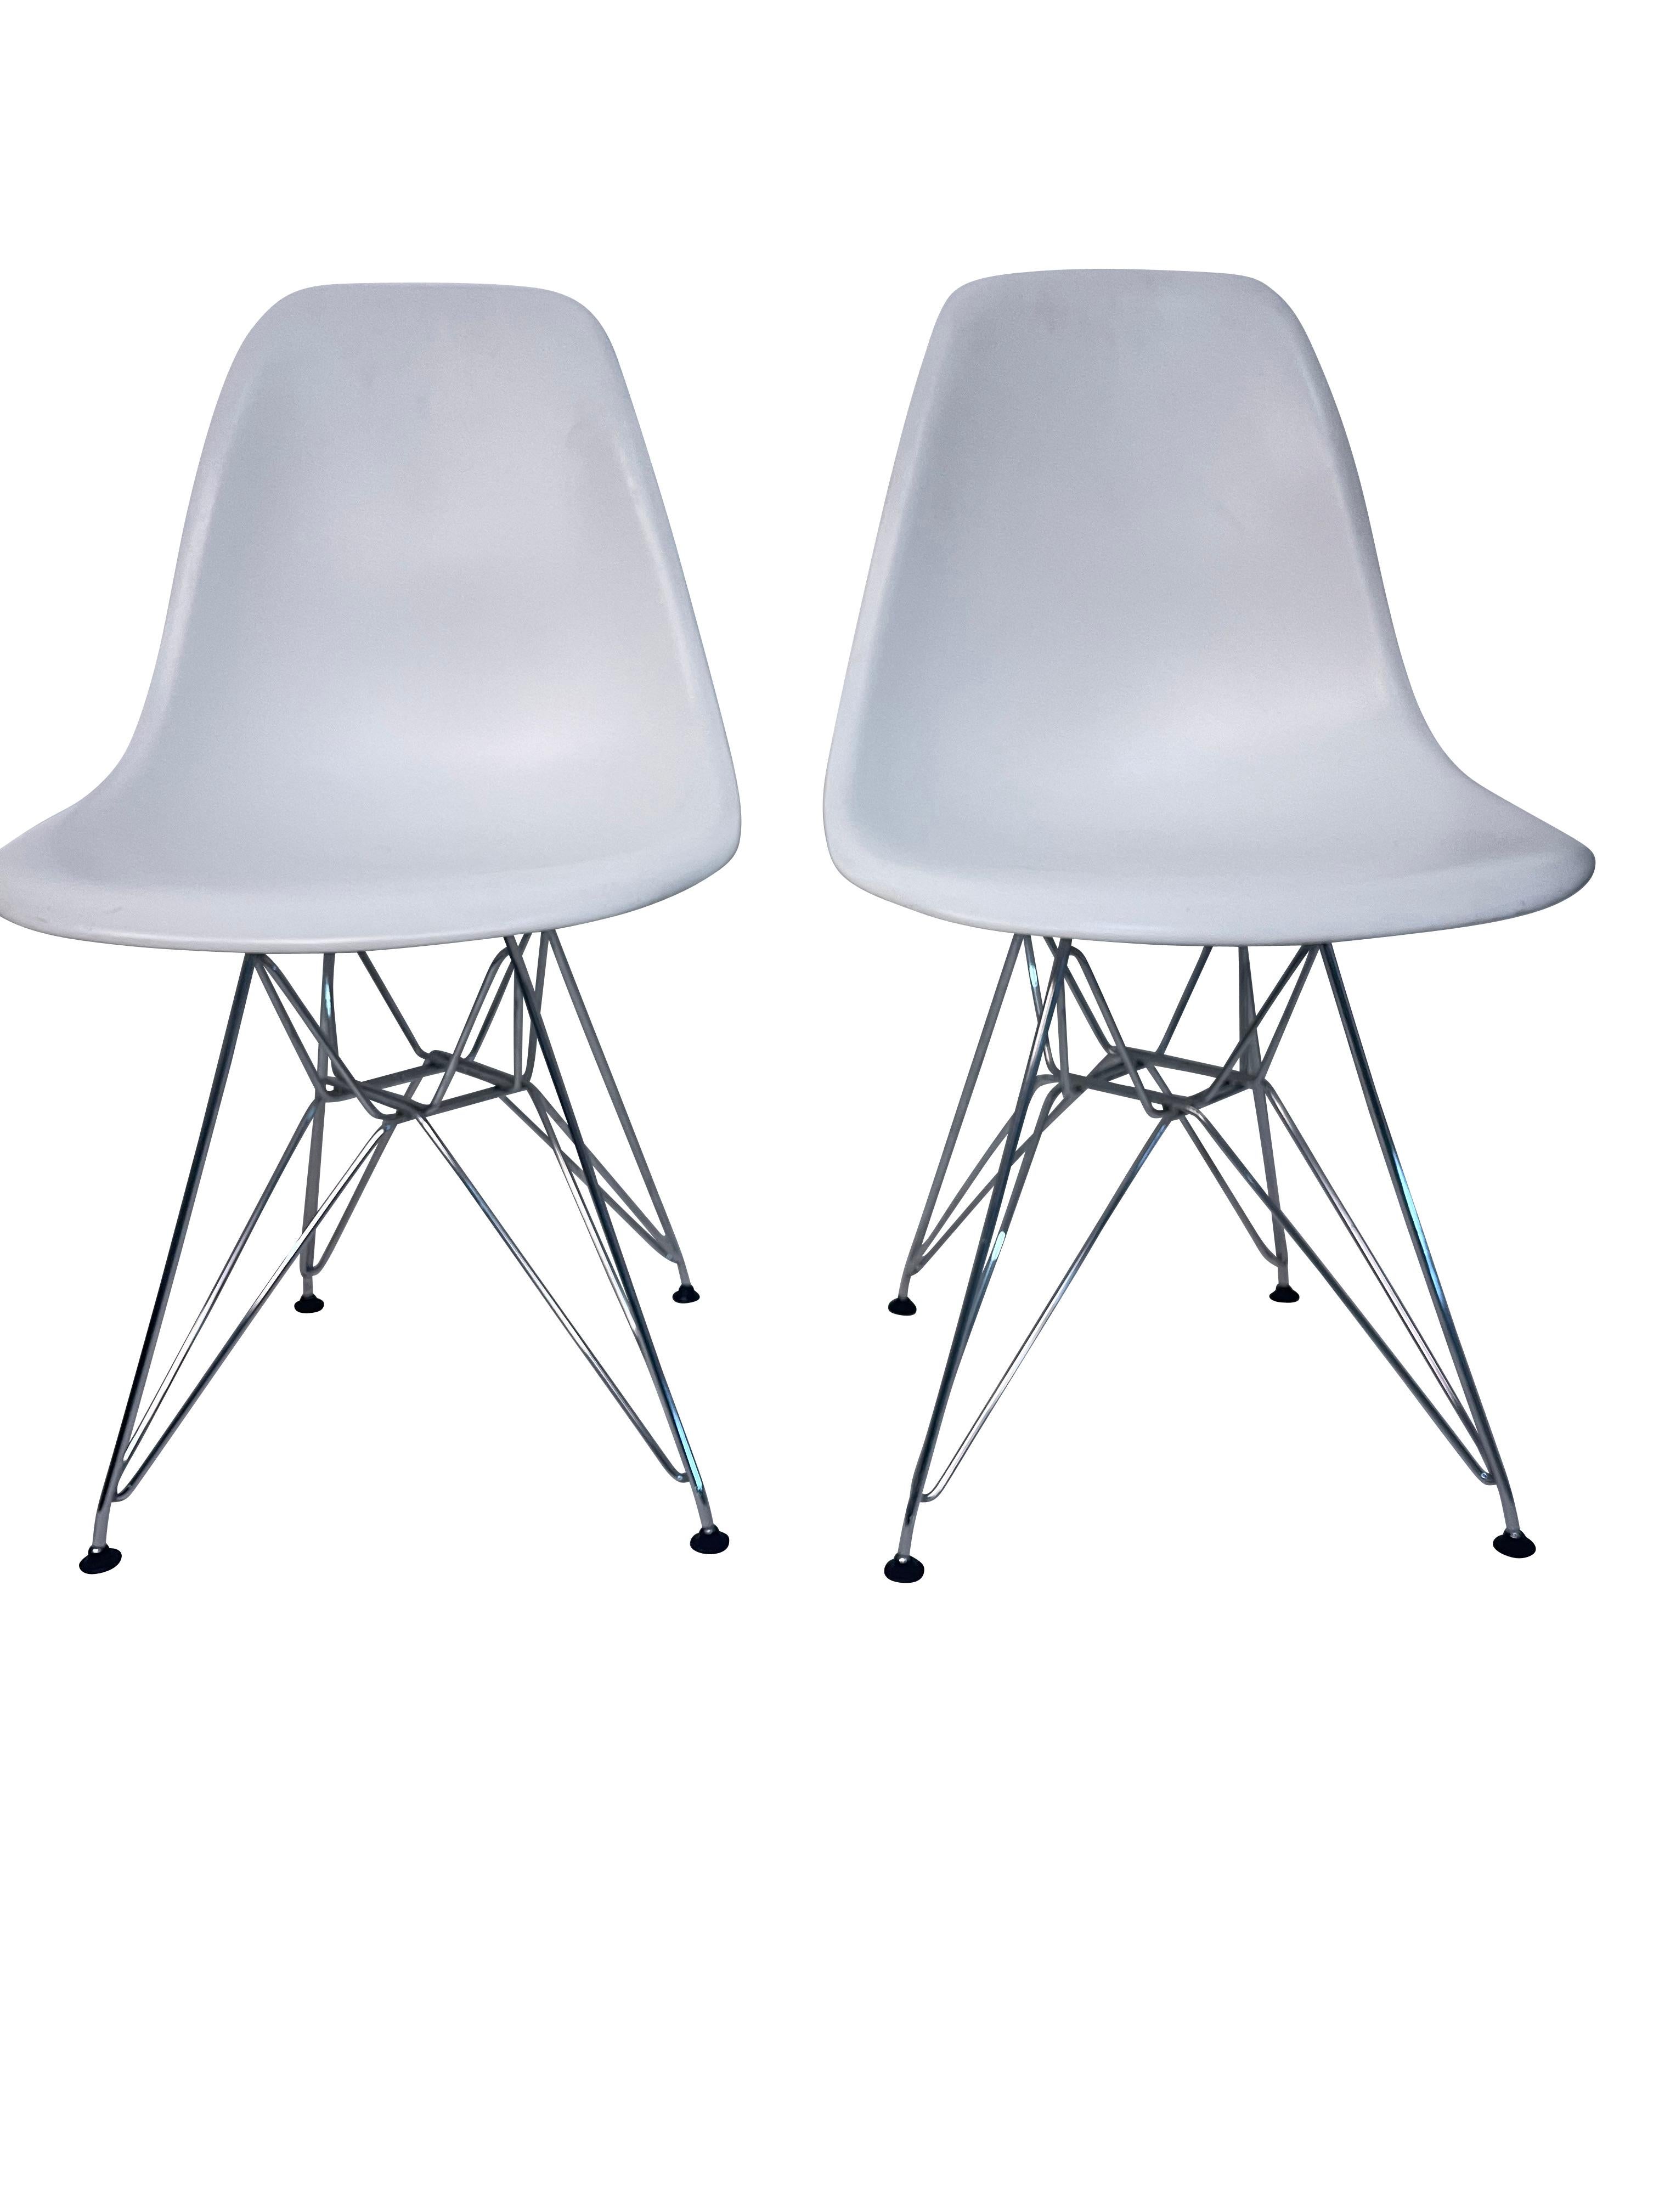 Mid-Century Modern Eames For Knoll Four Molded White Plastic Chairs with Eiffel Tower Bases For Sale